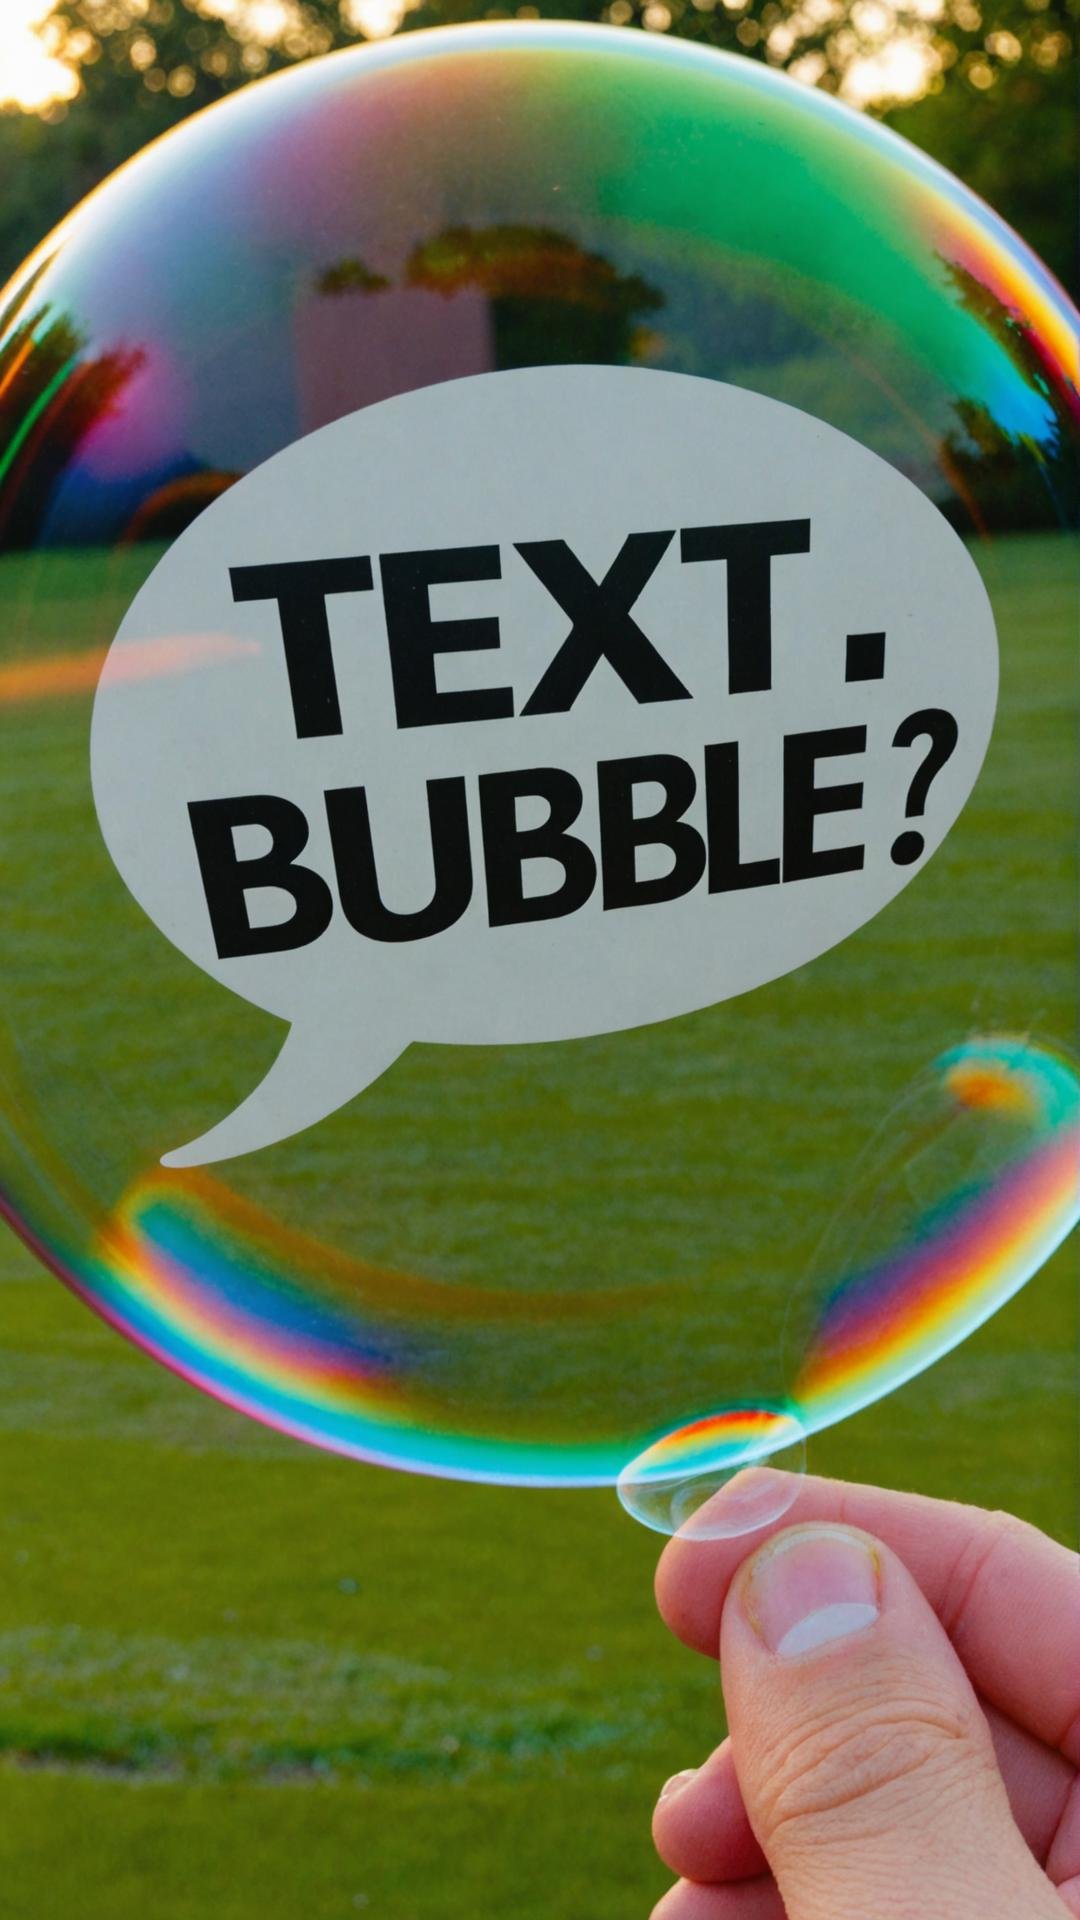 Photo of the best thing I have ever seen in my life with gas text bubble that says "text bubbble"